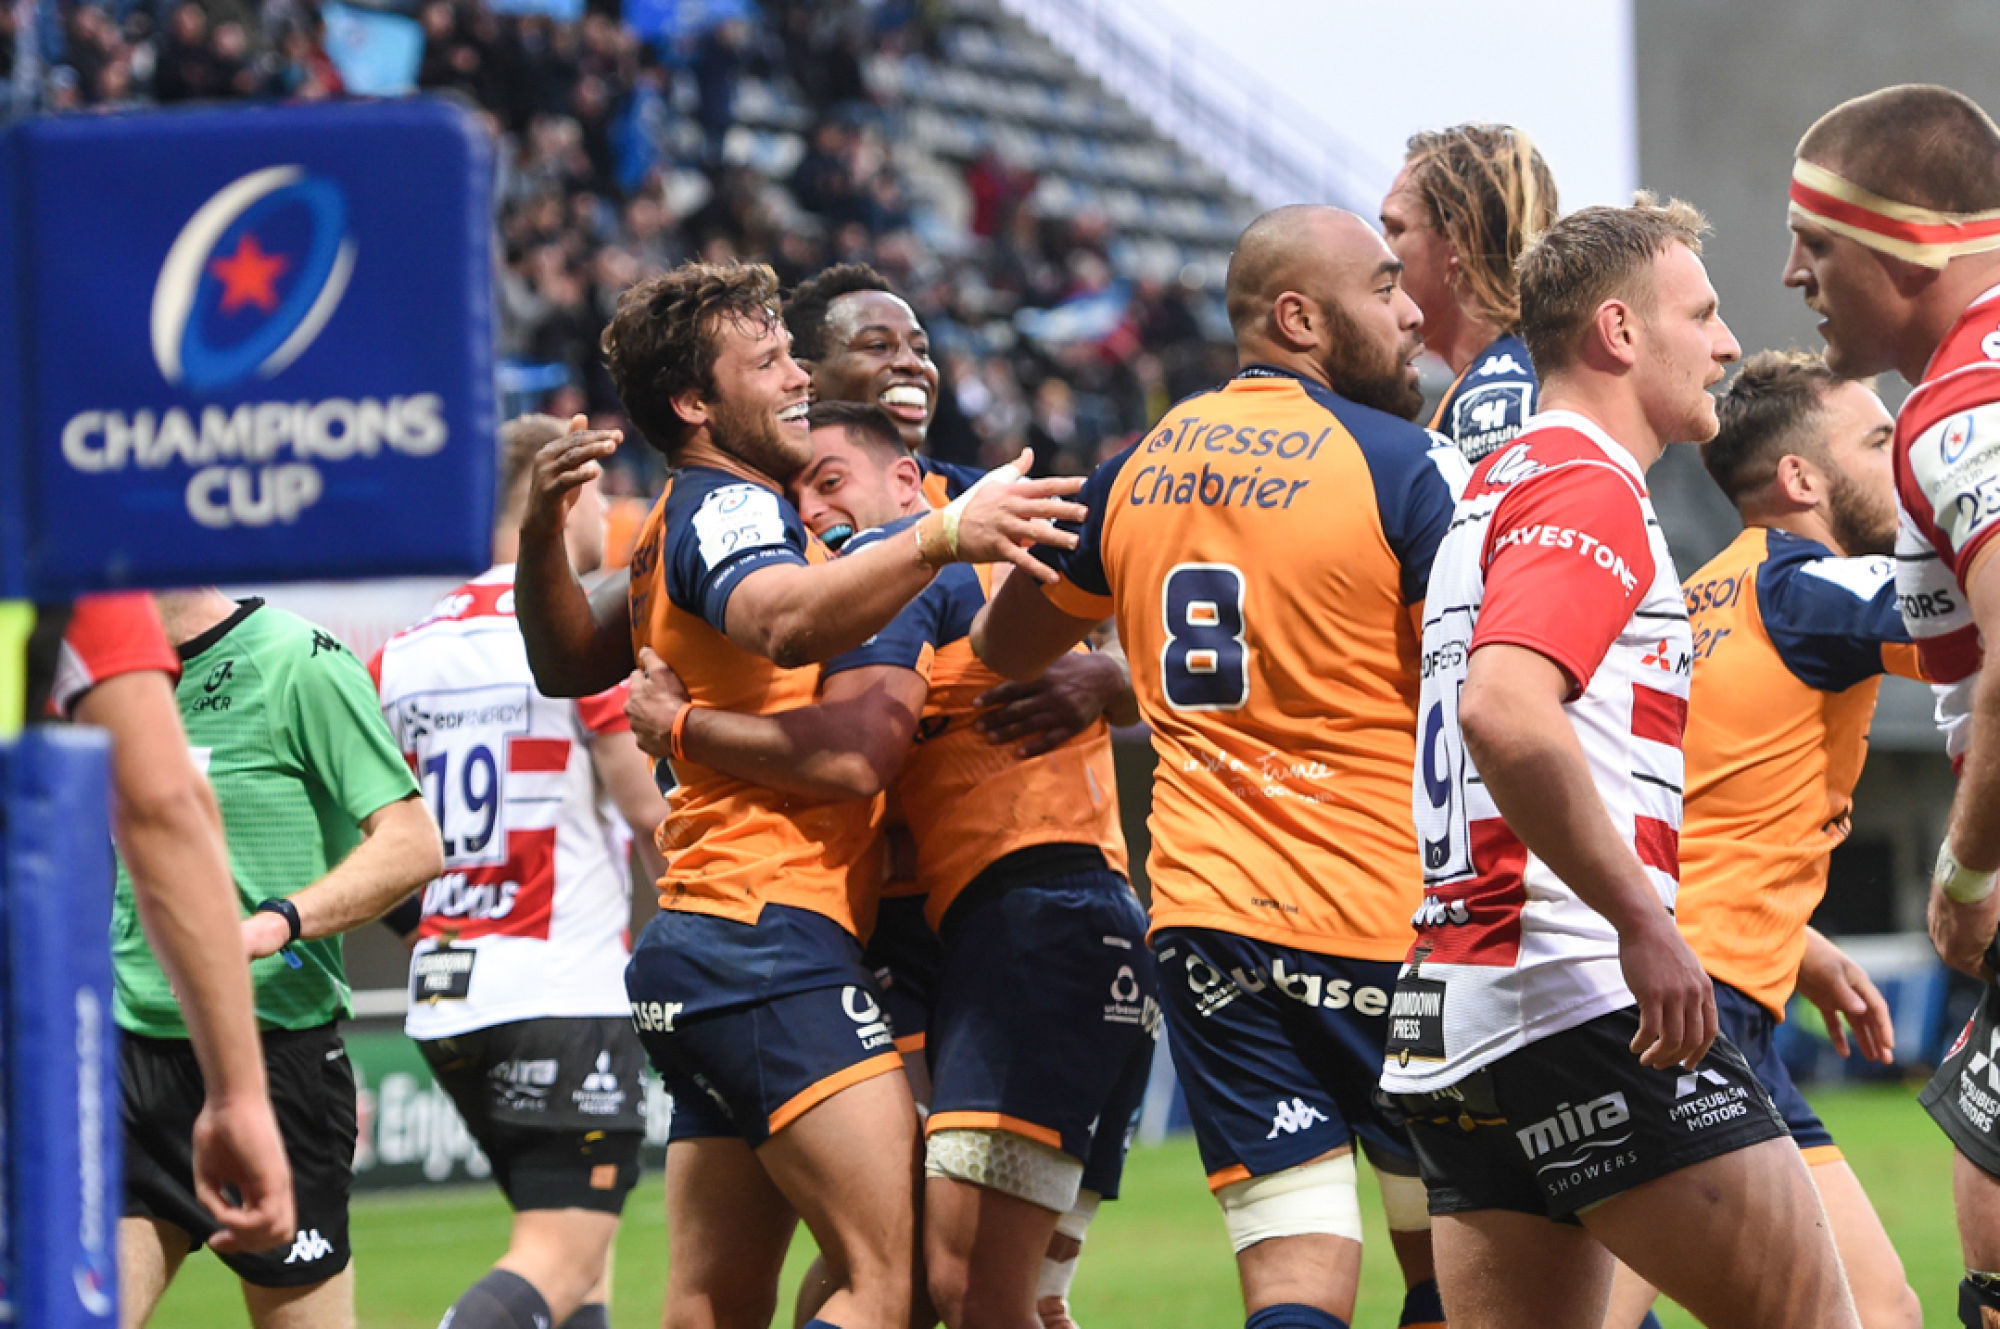 Jan SERFONTEIN of Montpellier celebrates his try  during the European Rugby Champions Cup, Pool 5 match between Montpellier and Gloucester on November 24, 2019 in Montpellier, France. (Photo by Alexandre Dimou/Icon Sport) - Altrad Stadium - Montpellier (France)